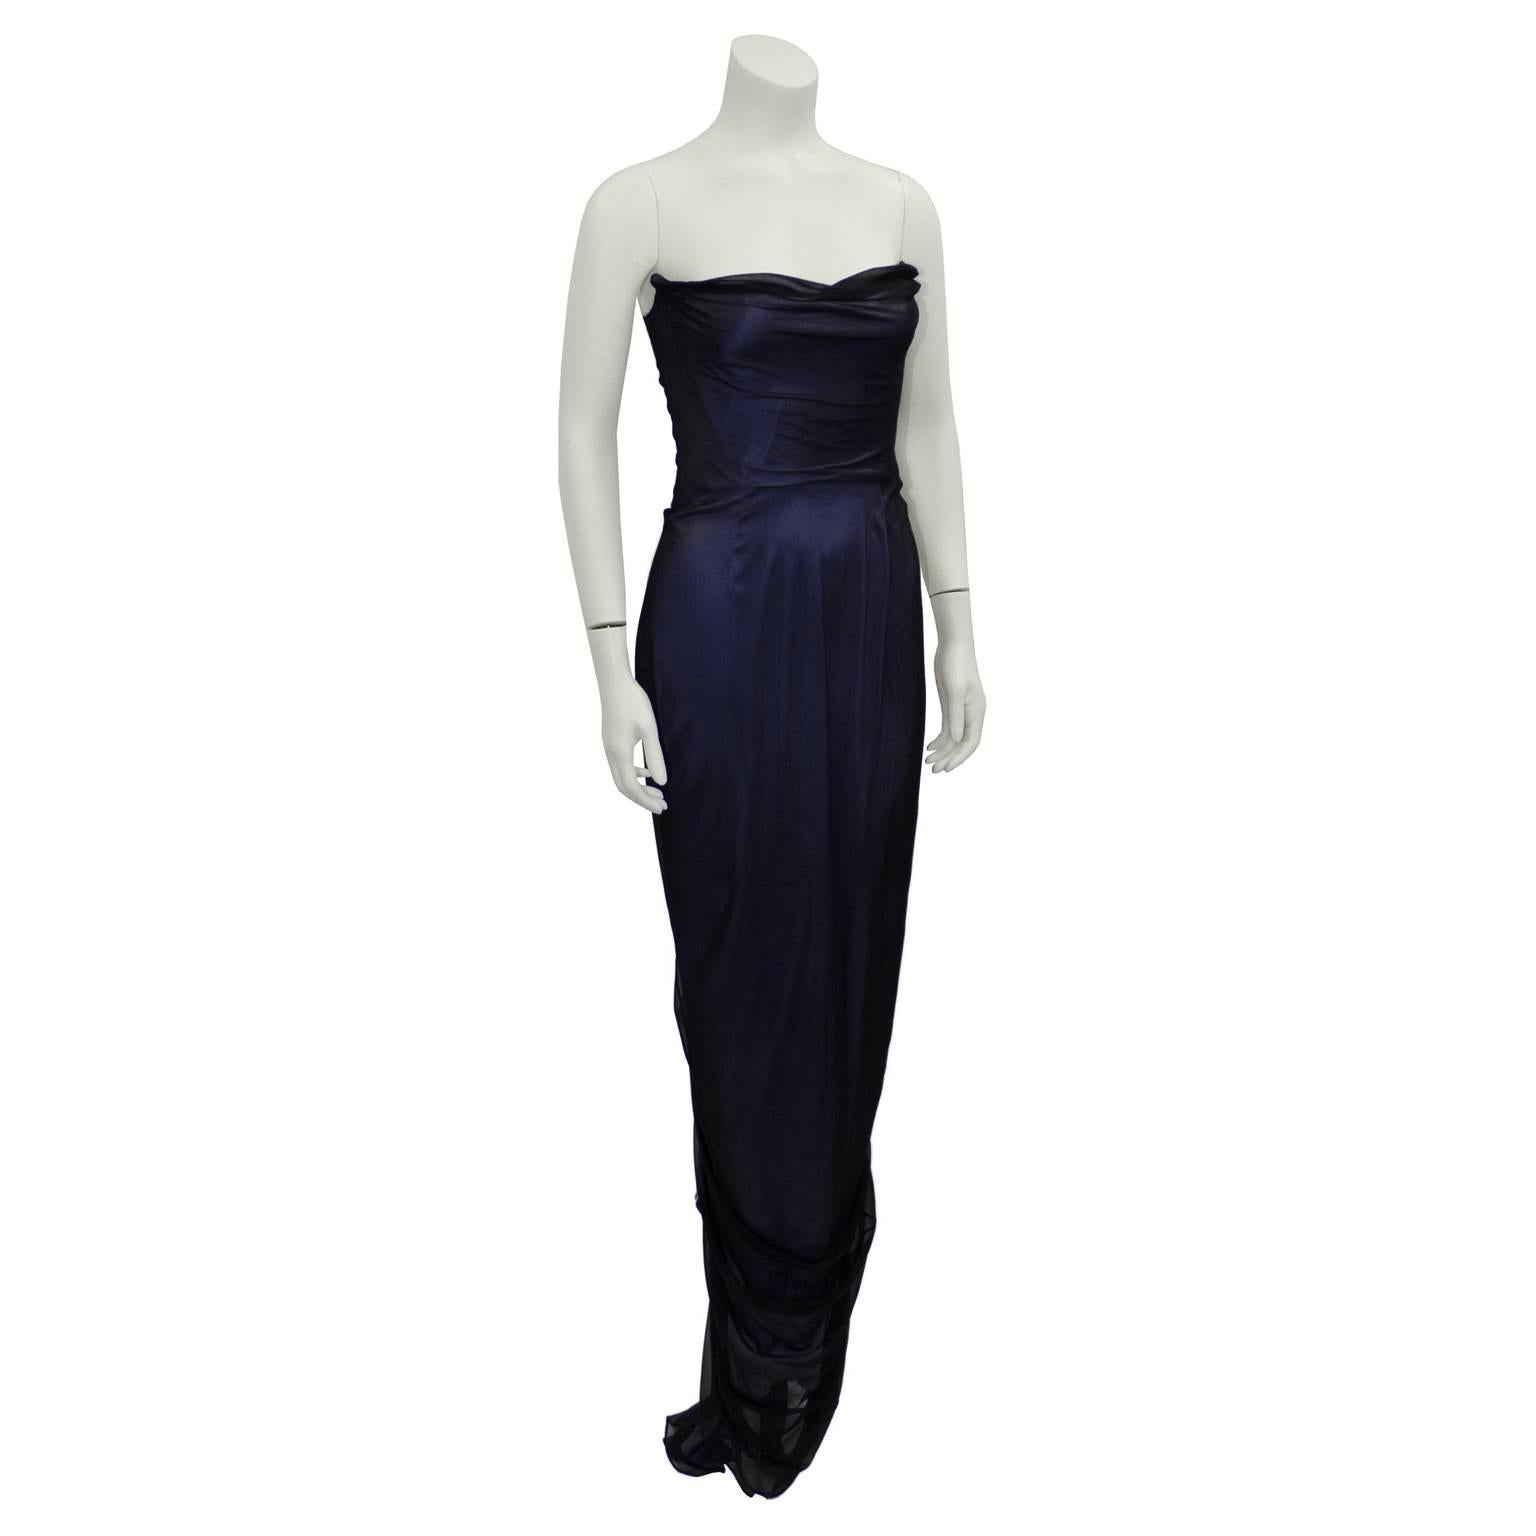 Fabulous Richard Tyler Couture slinky gown from the late1990s. A red carpet worthy piece that's strapless, with a mermaid silhouette. Purple silk is overlapped in a navy sheer net fabric. Excess fabric forms soft folds on bodice. Navy fabric is